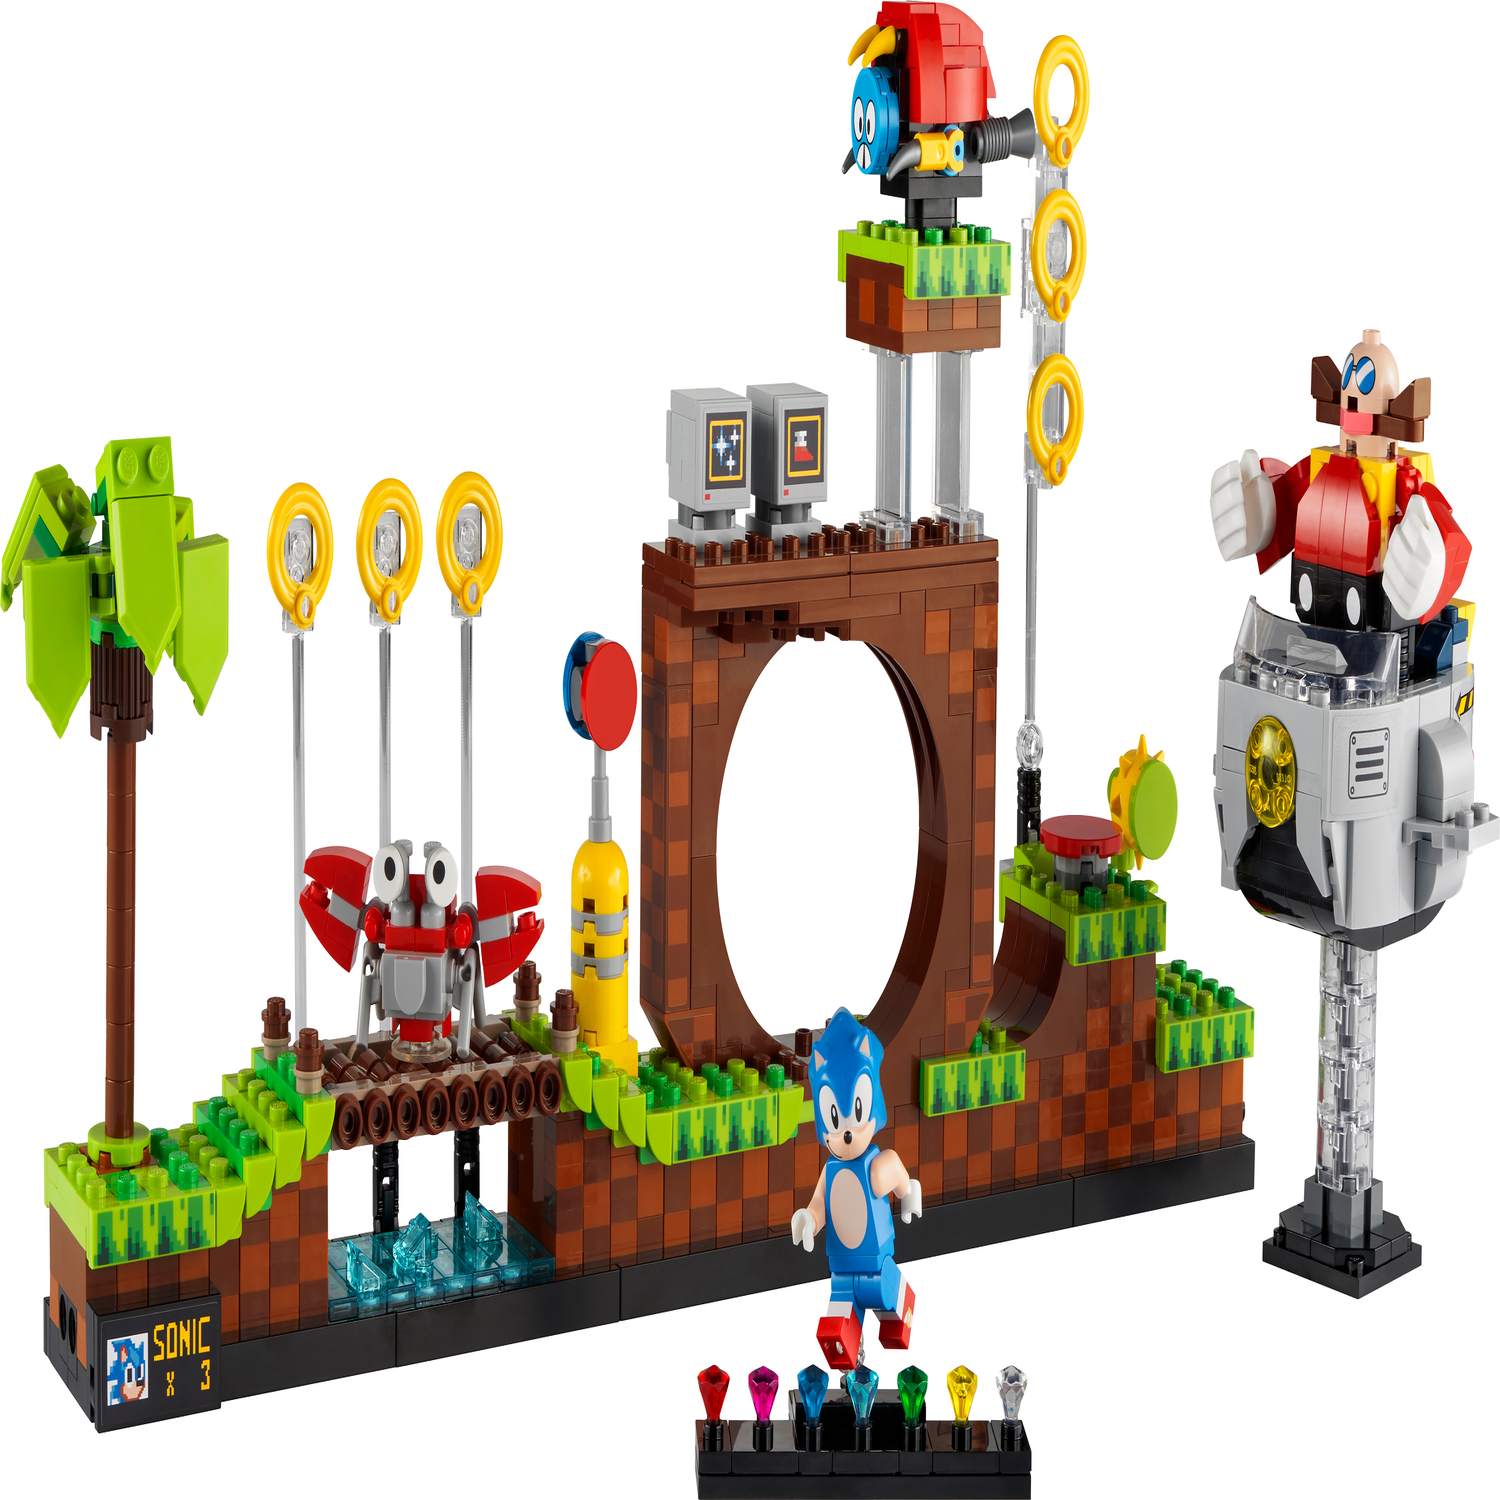 LEGO Sonic the Hedgehogs™ – Green Hill Zone #21331 (Ver. 2) Light Kit